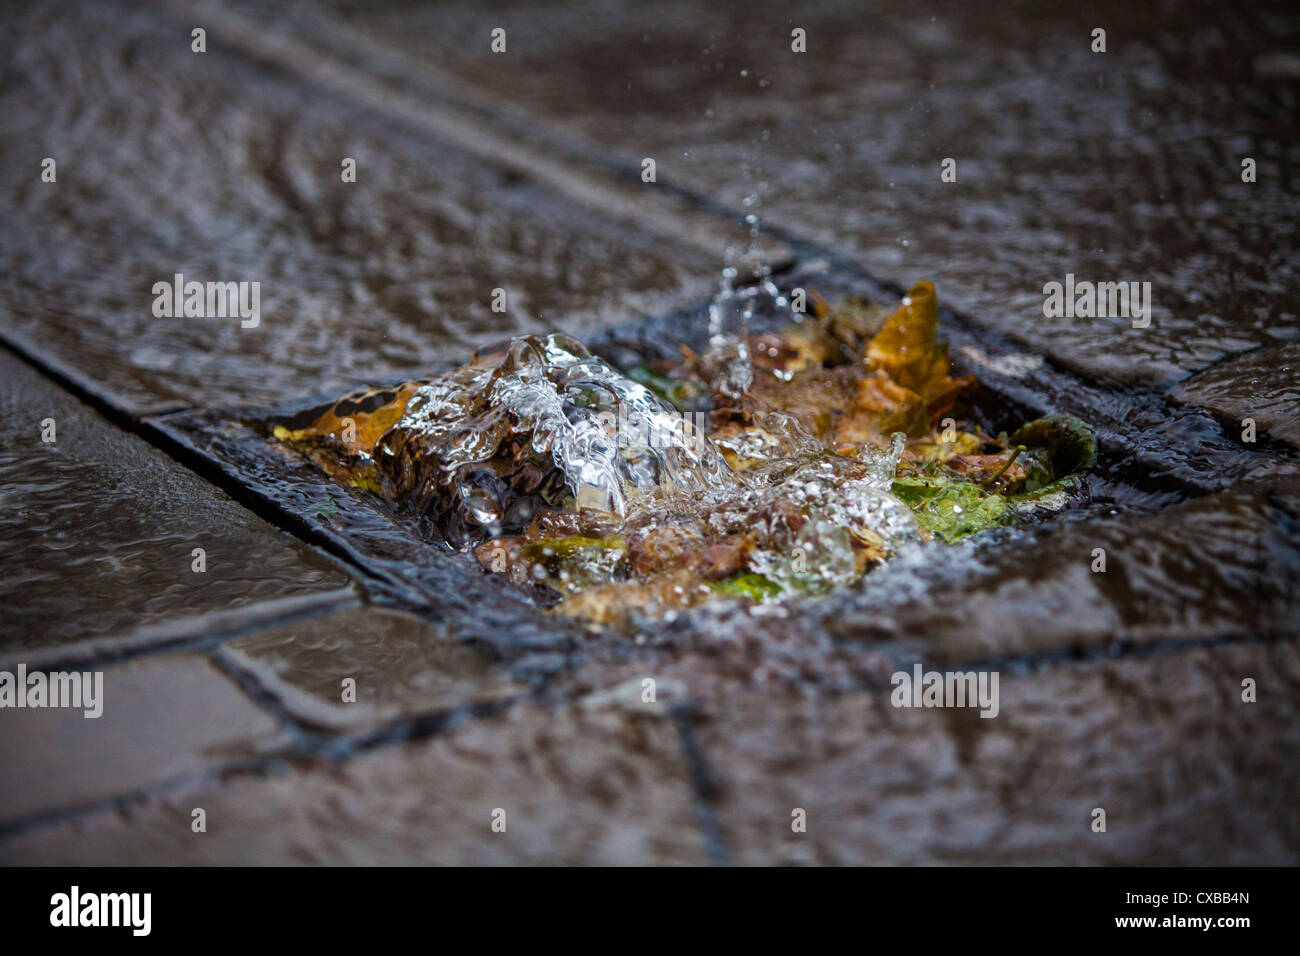 Rain water flowing in to a grate blocked with leaves in Birmingham, UK. Stock Photo